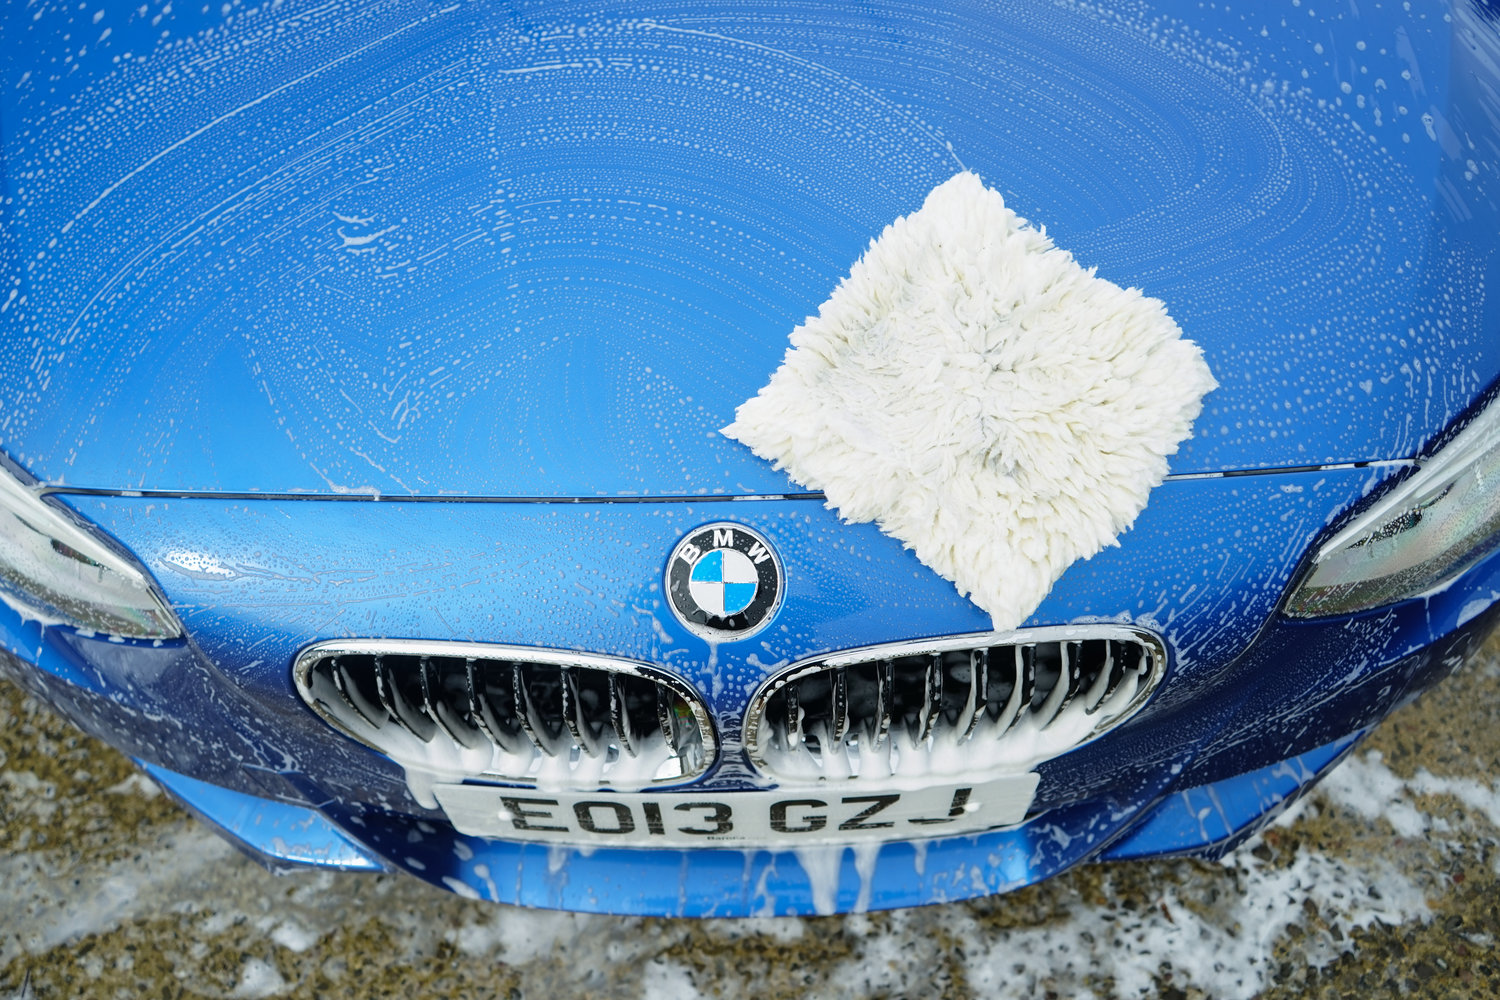 Is It Really Necessary to Wax My Car? - The News Wheel